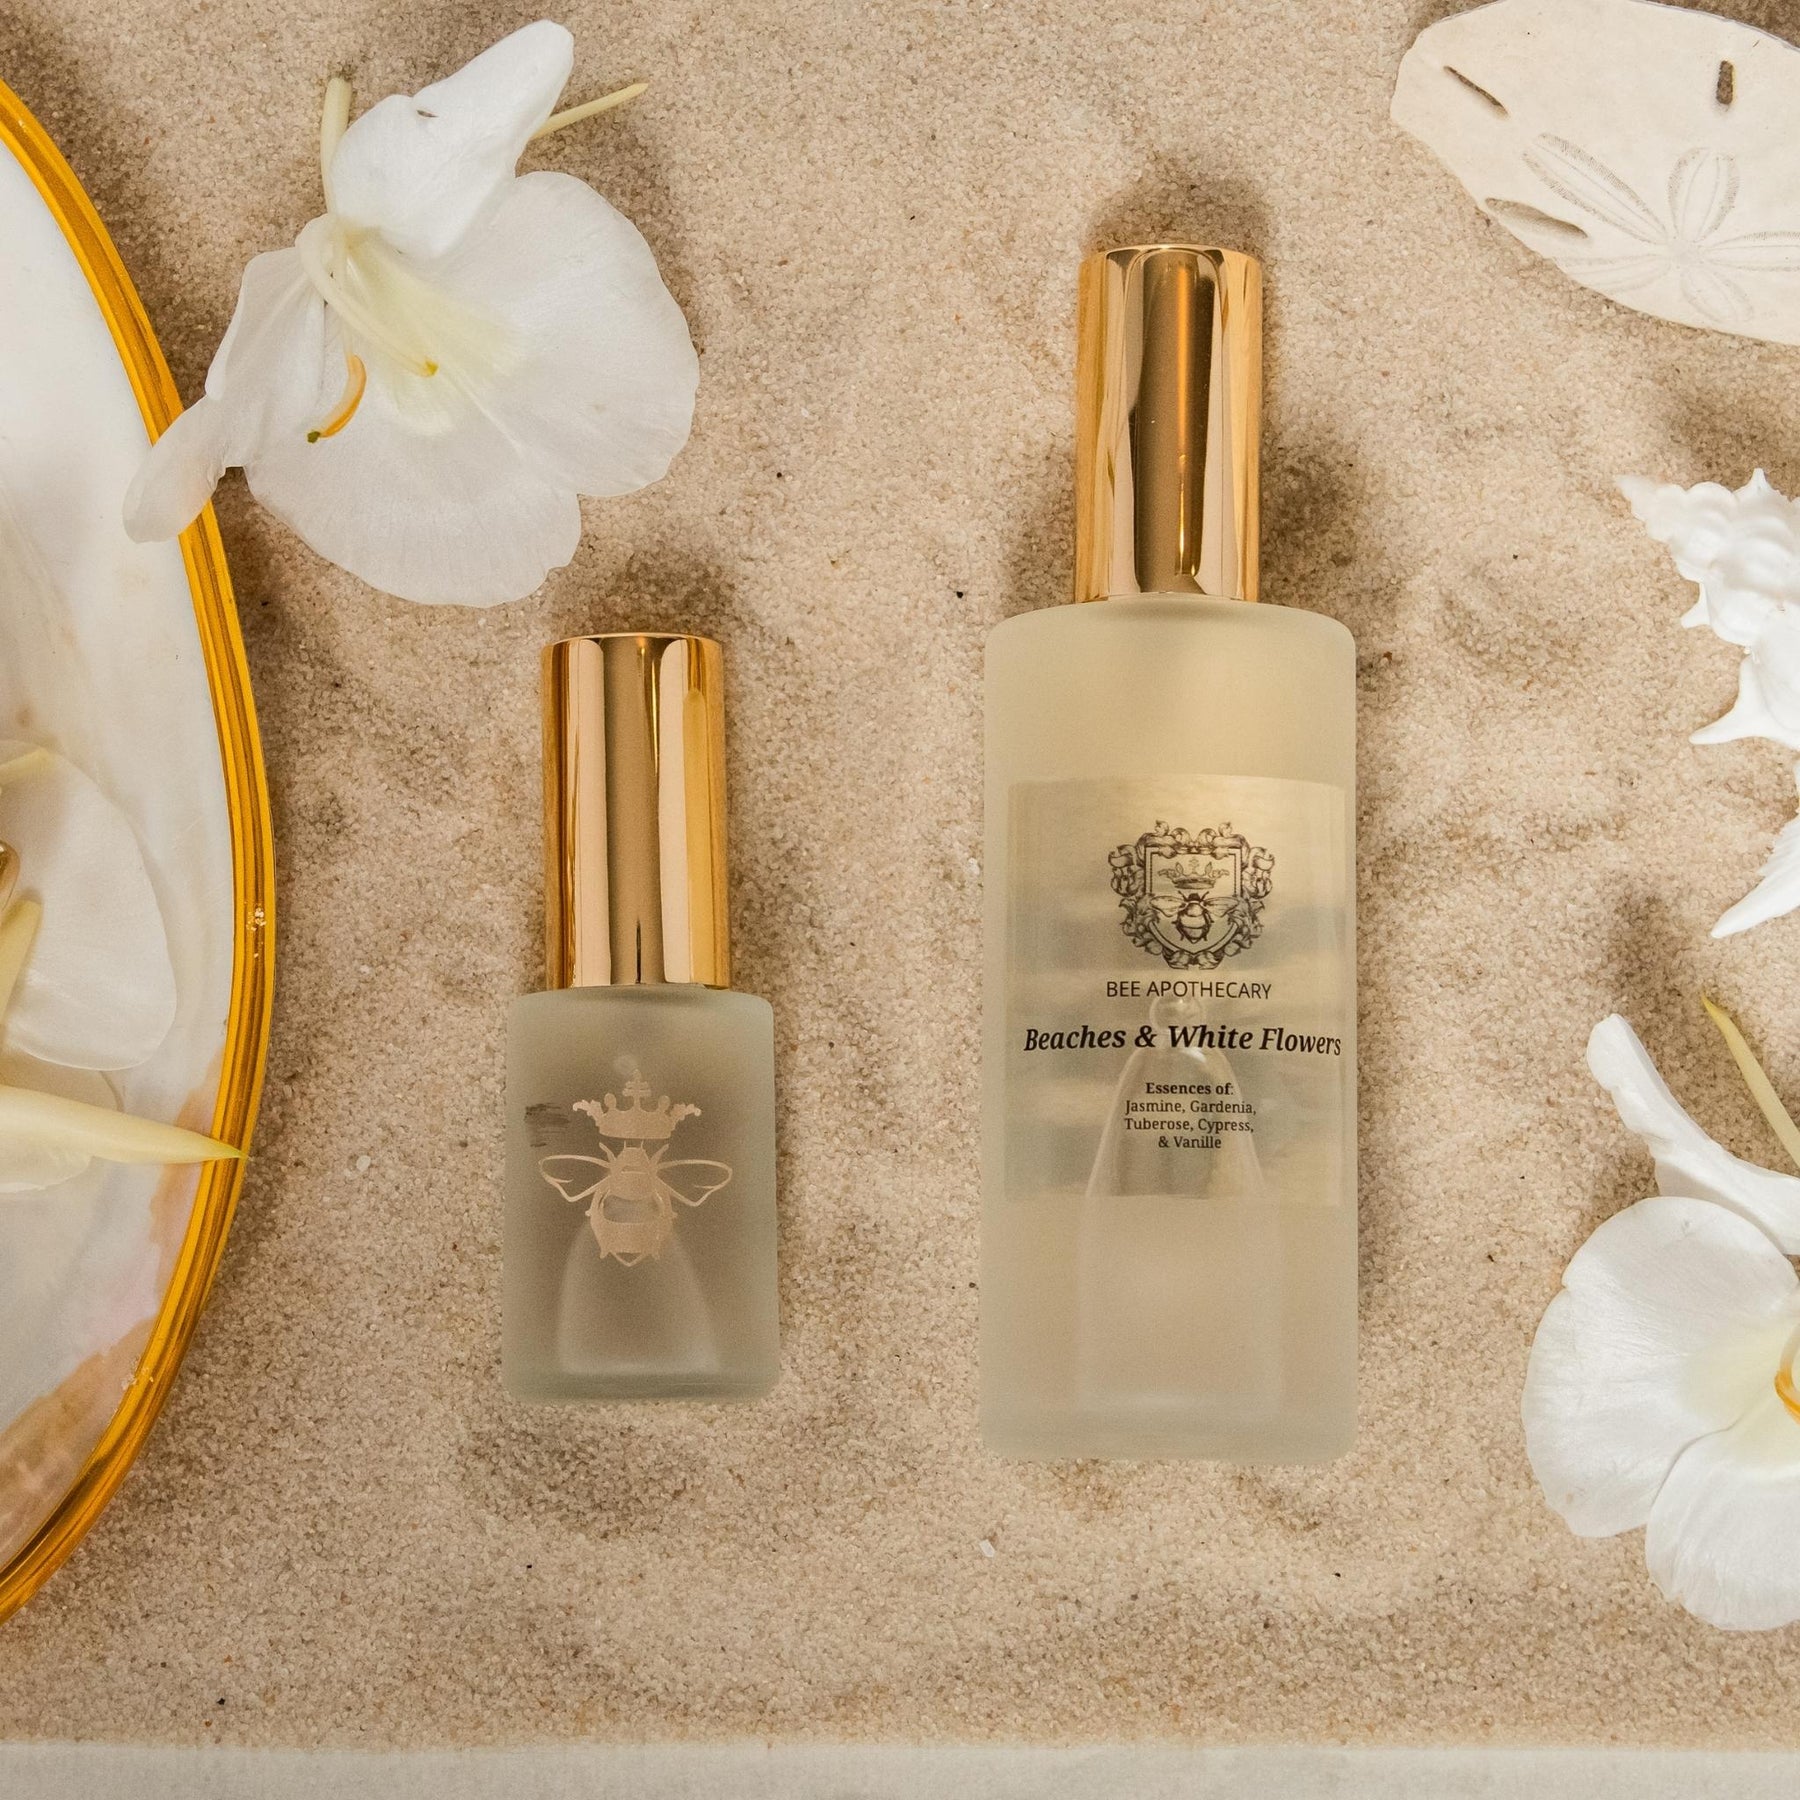 Beaches & White Flowers perfume bottles in the sand by Bee Apothecary